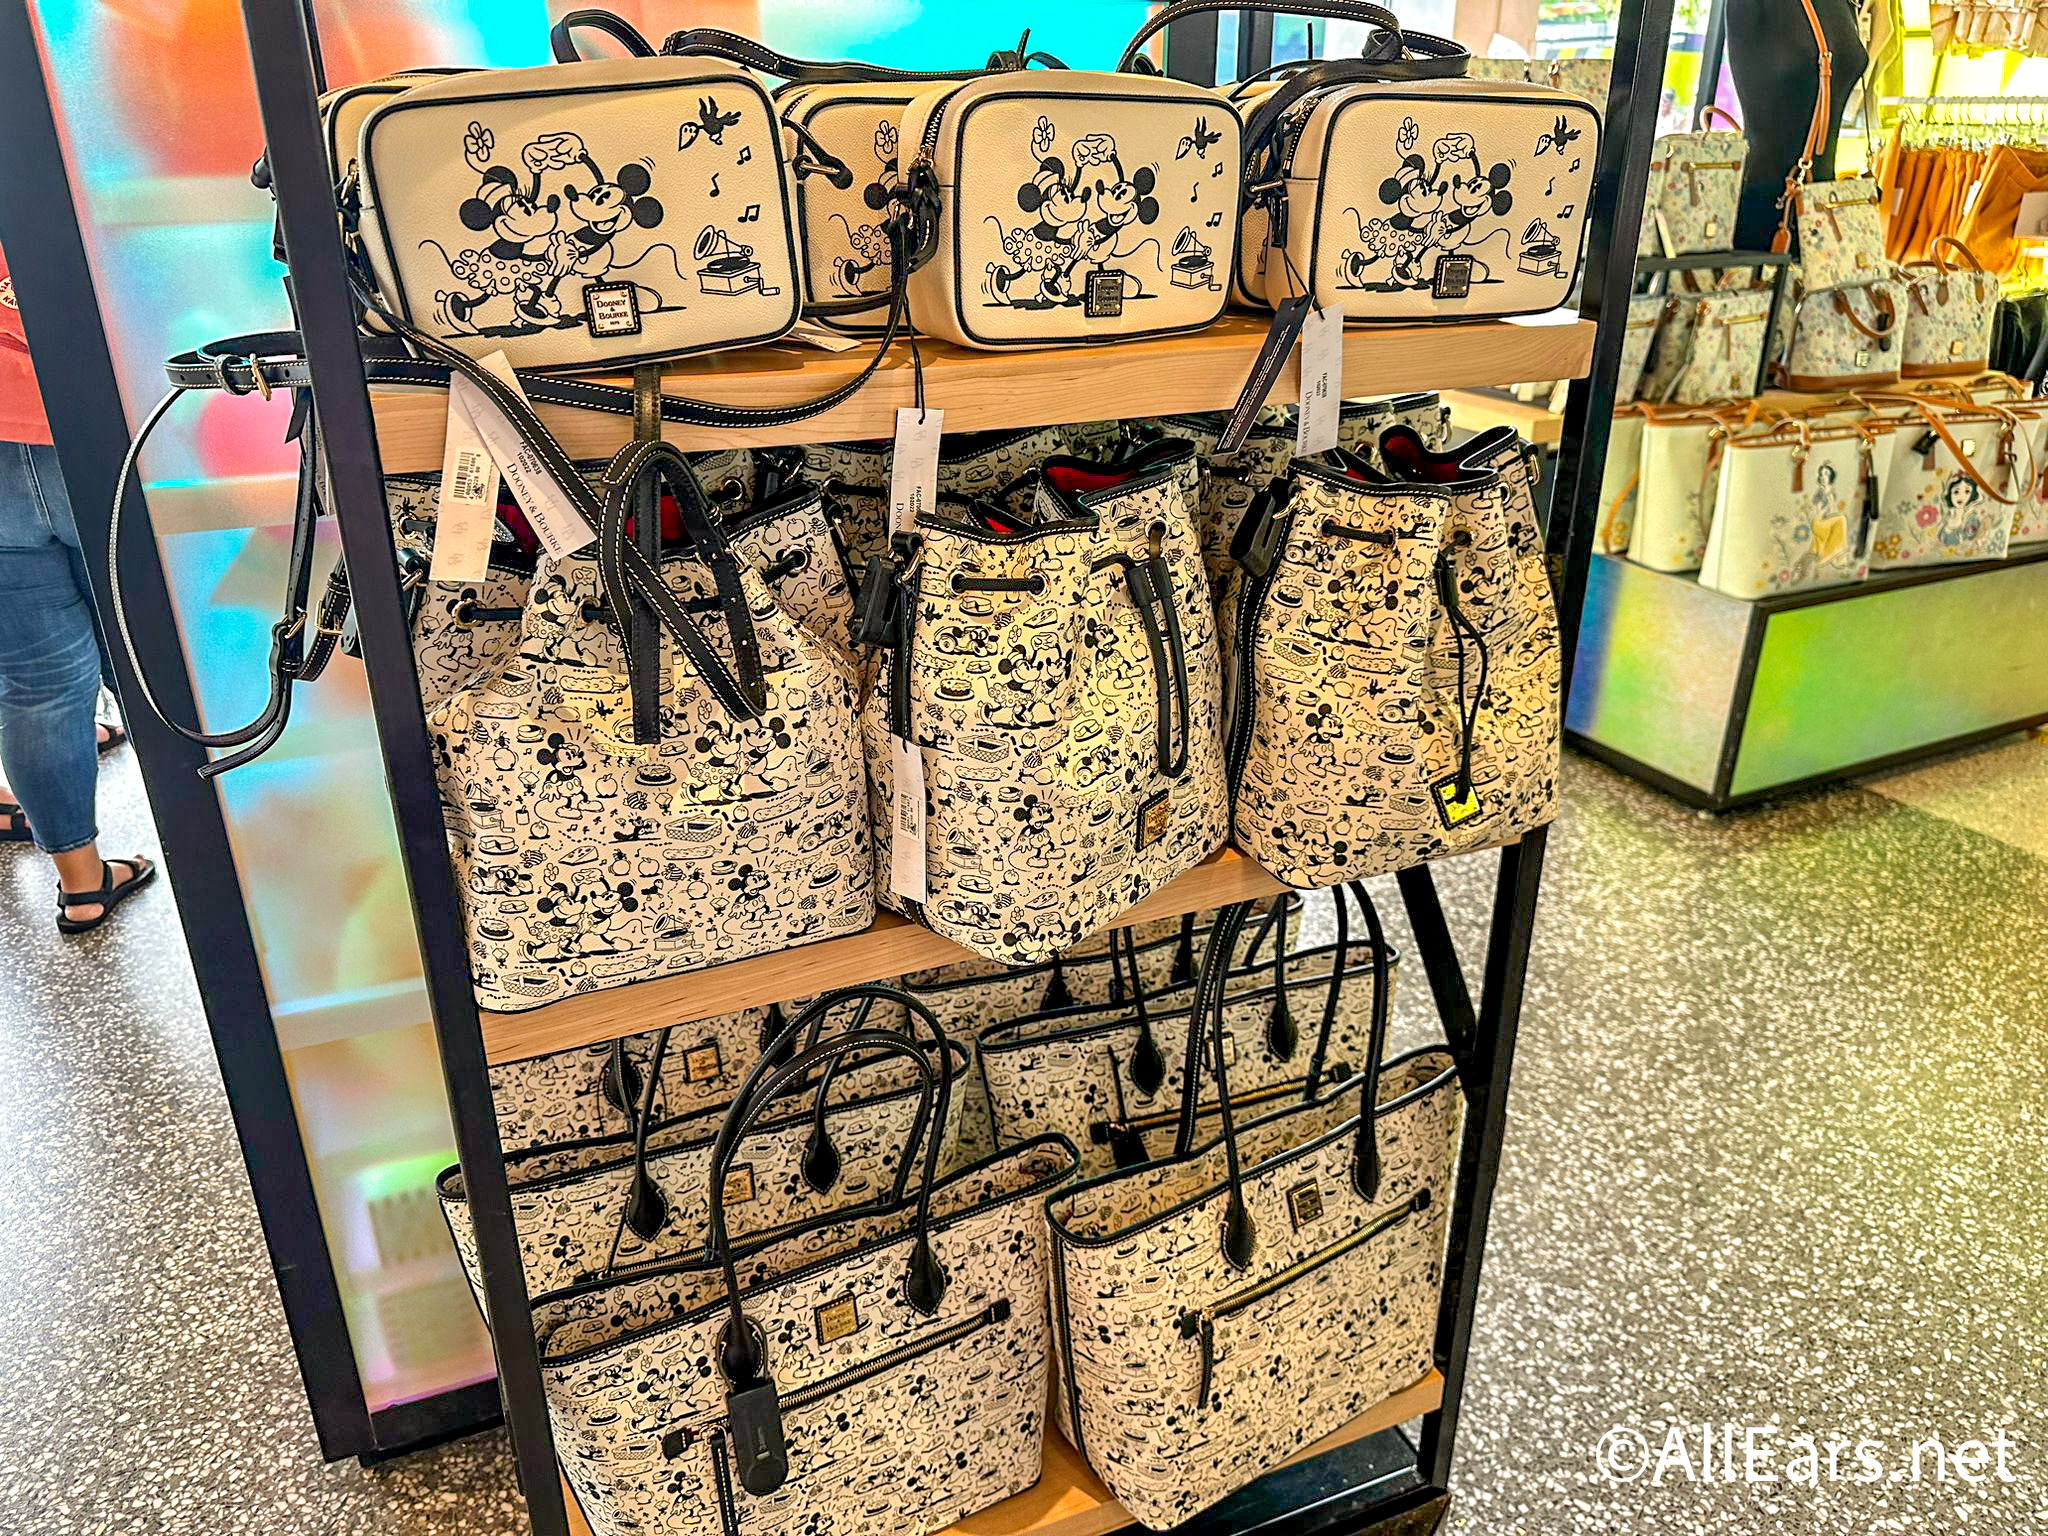 Exclusive Drop: Loungefly Walt Disney Archives Mickey and Minnie Space Wallet - 9/9/22